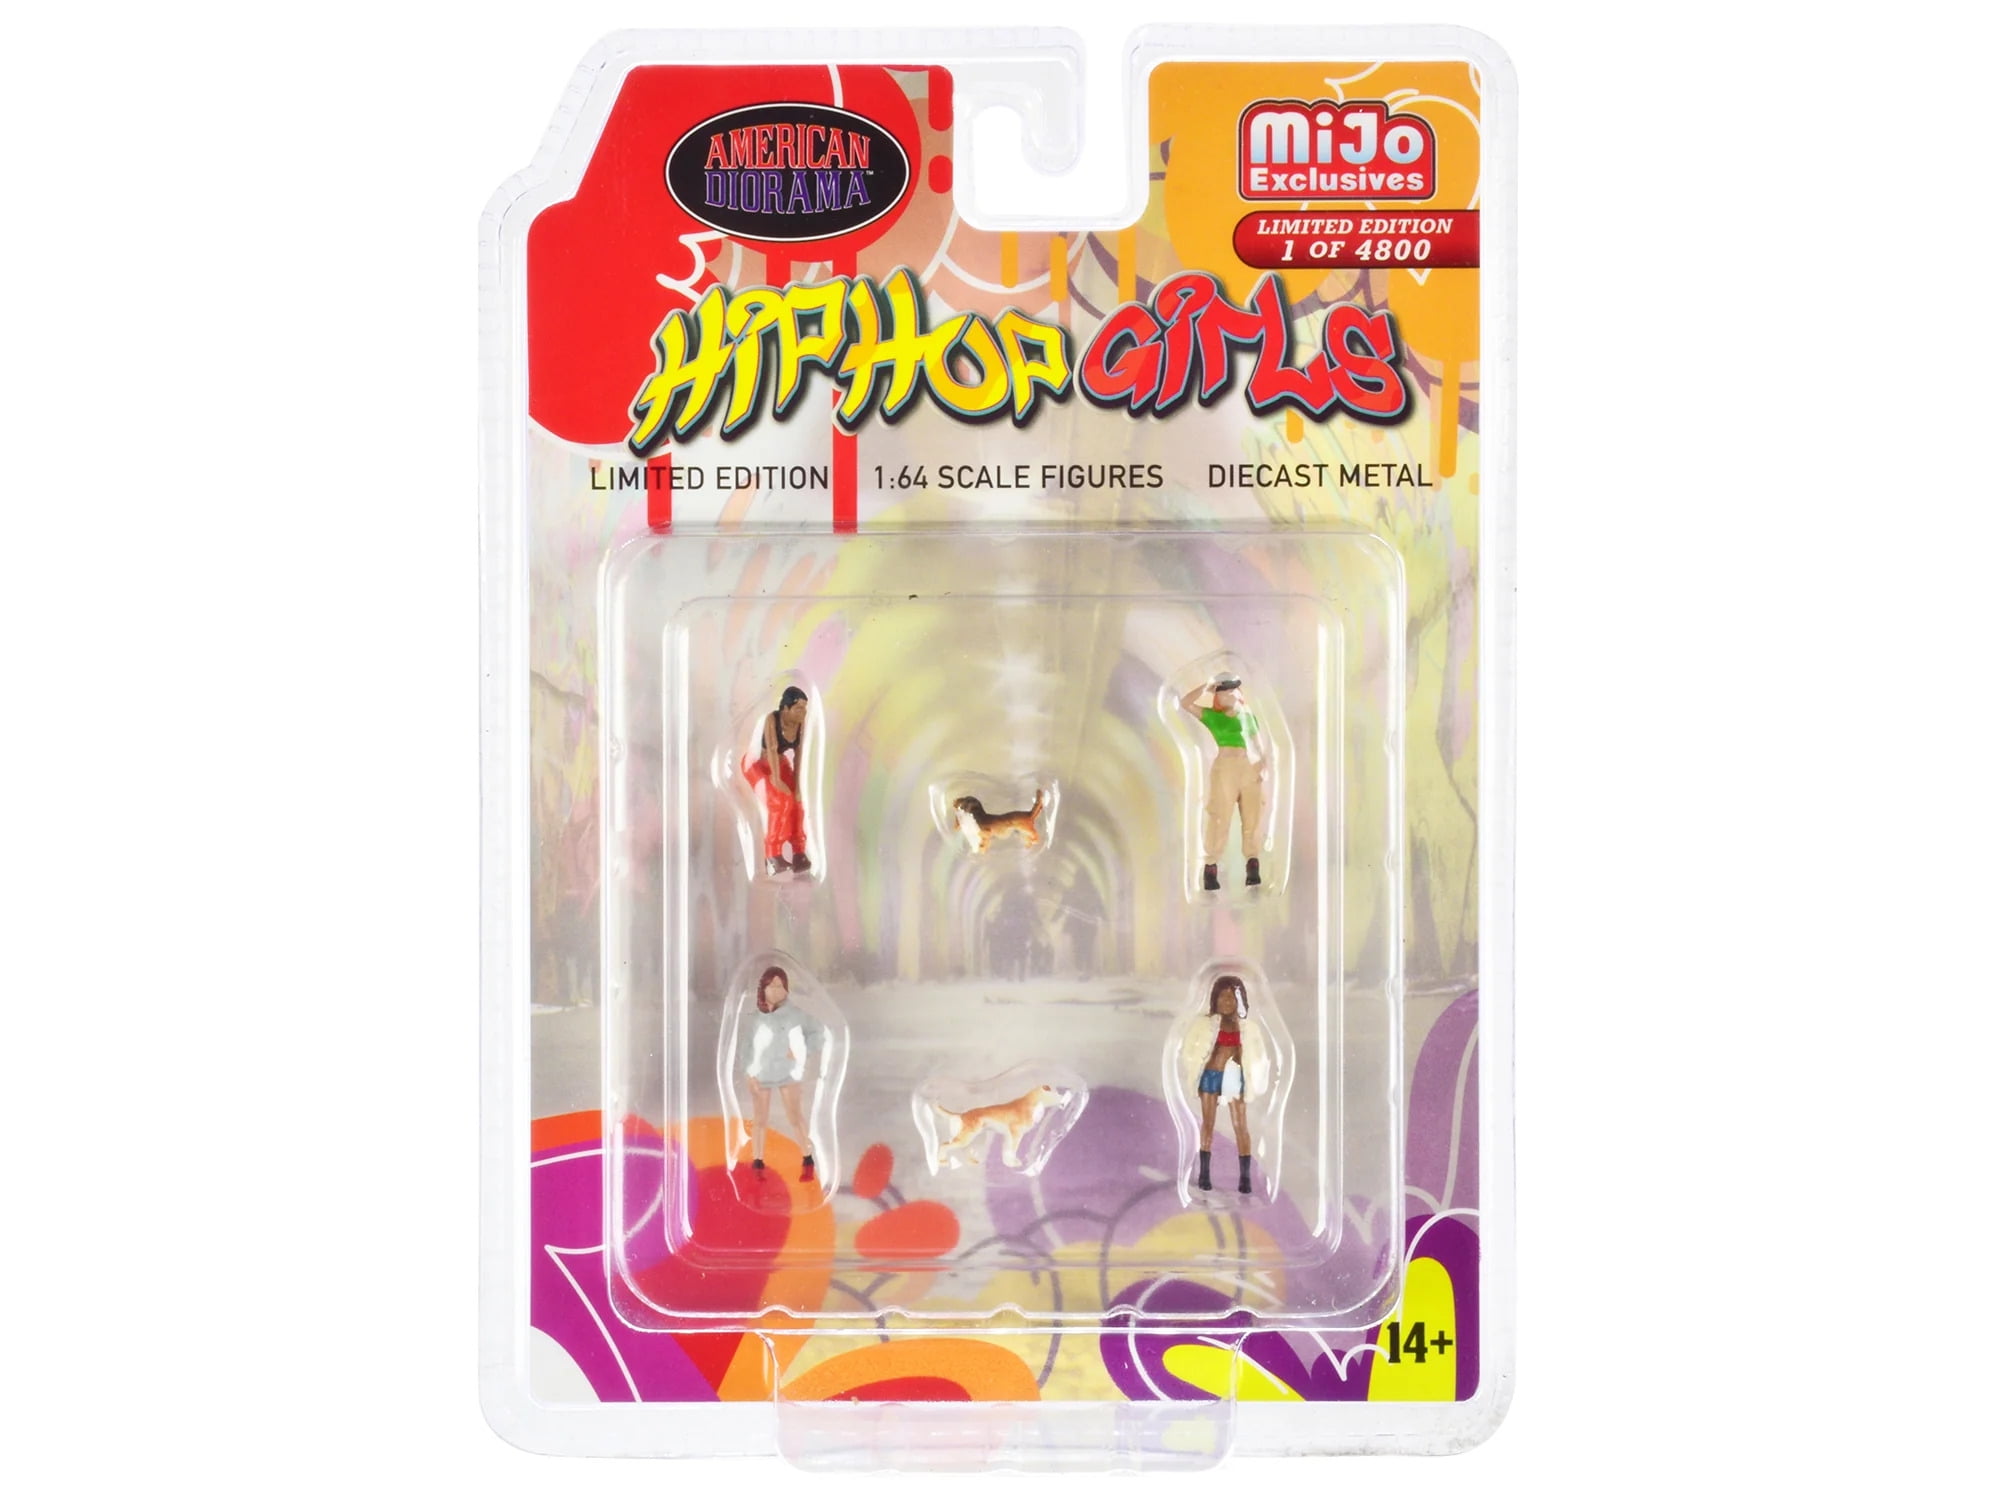 Picture of American Diorama AD-76505MJ Hip Hop Girls 6 Piece Diecast Set - 4 Women 2 Dog Figures Limited Edition Worldwide 1-64 Scale Models - 4800 Piece